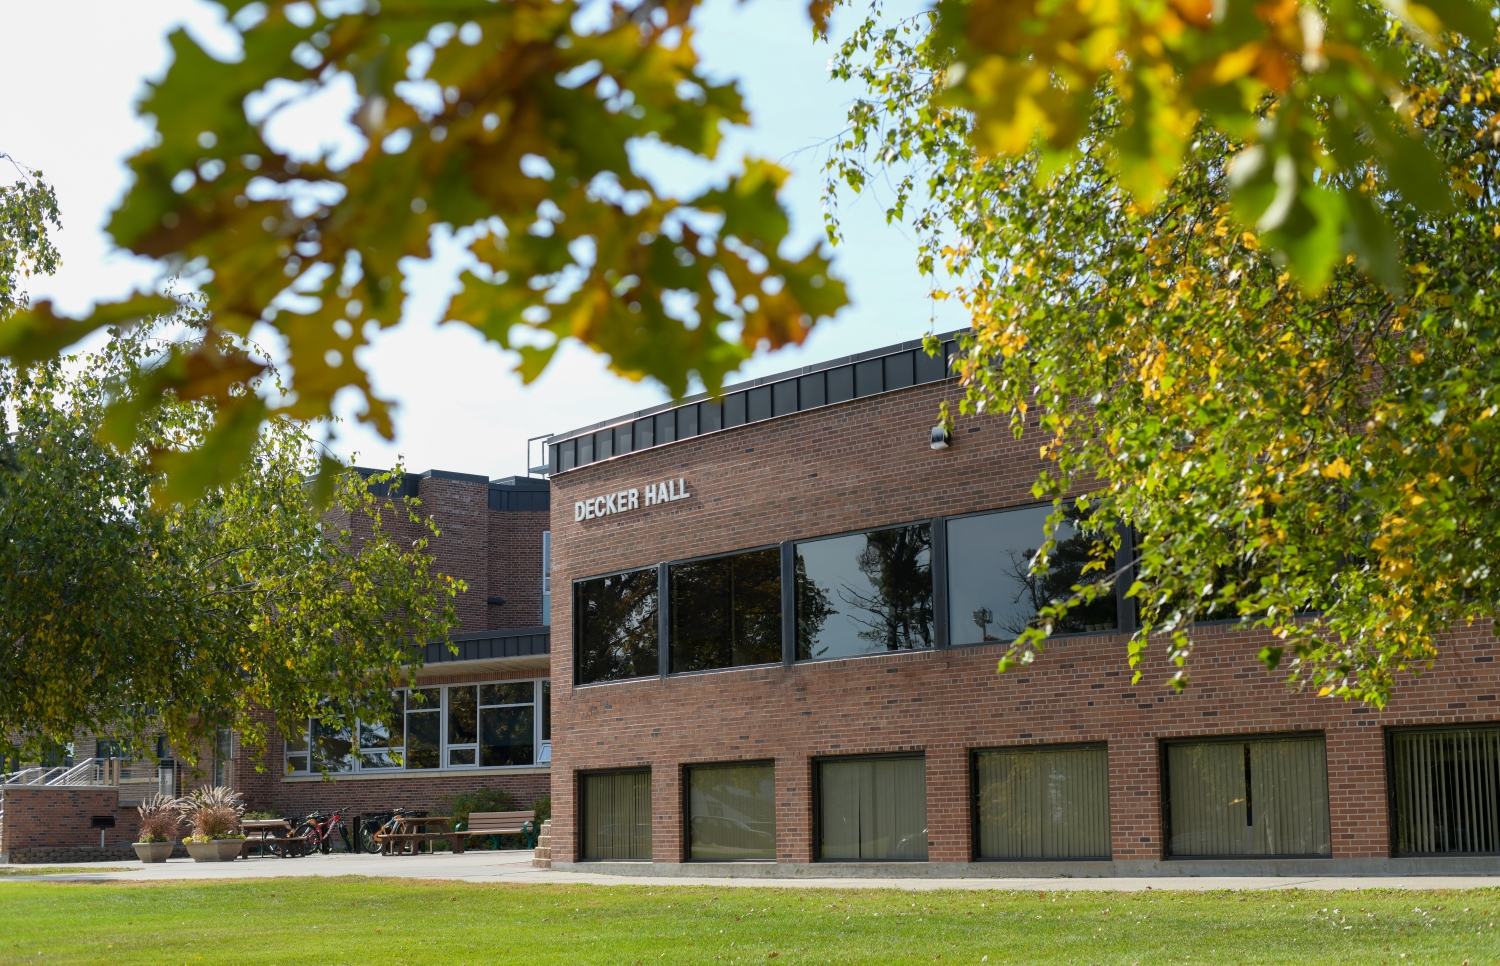 Decker Hall surrounded by fall foliage